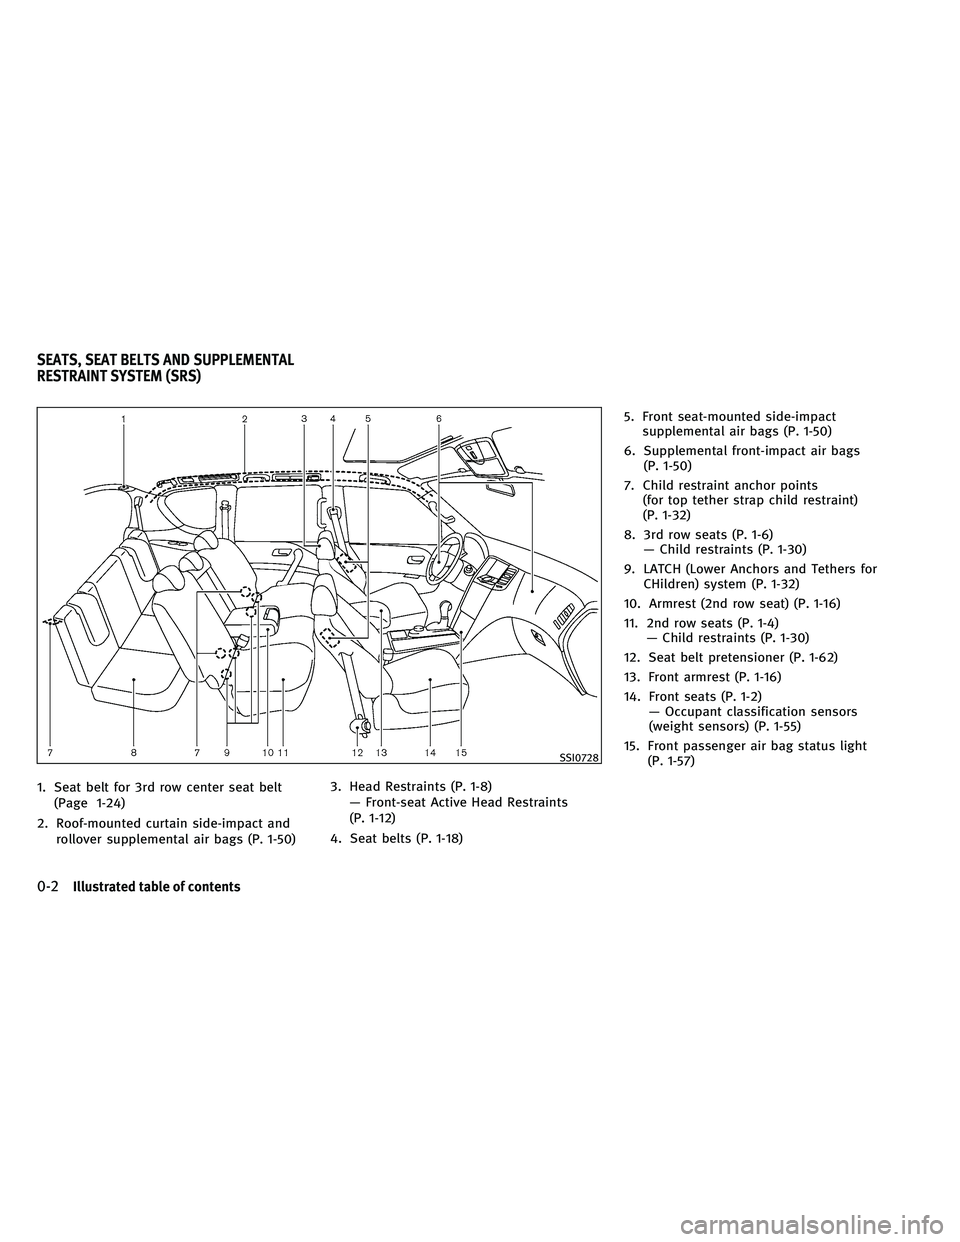 INFINITI QX 2011  Owners Manual 1. Seat belt for 3rd row center seat belt(Page 1-24)
2. Roof-mounted curtain side-impact and rollover supplemental air bags (P. 1-50) 3. Head Restraints (P. 1-8)
— Front-seat Active Head Restraints
